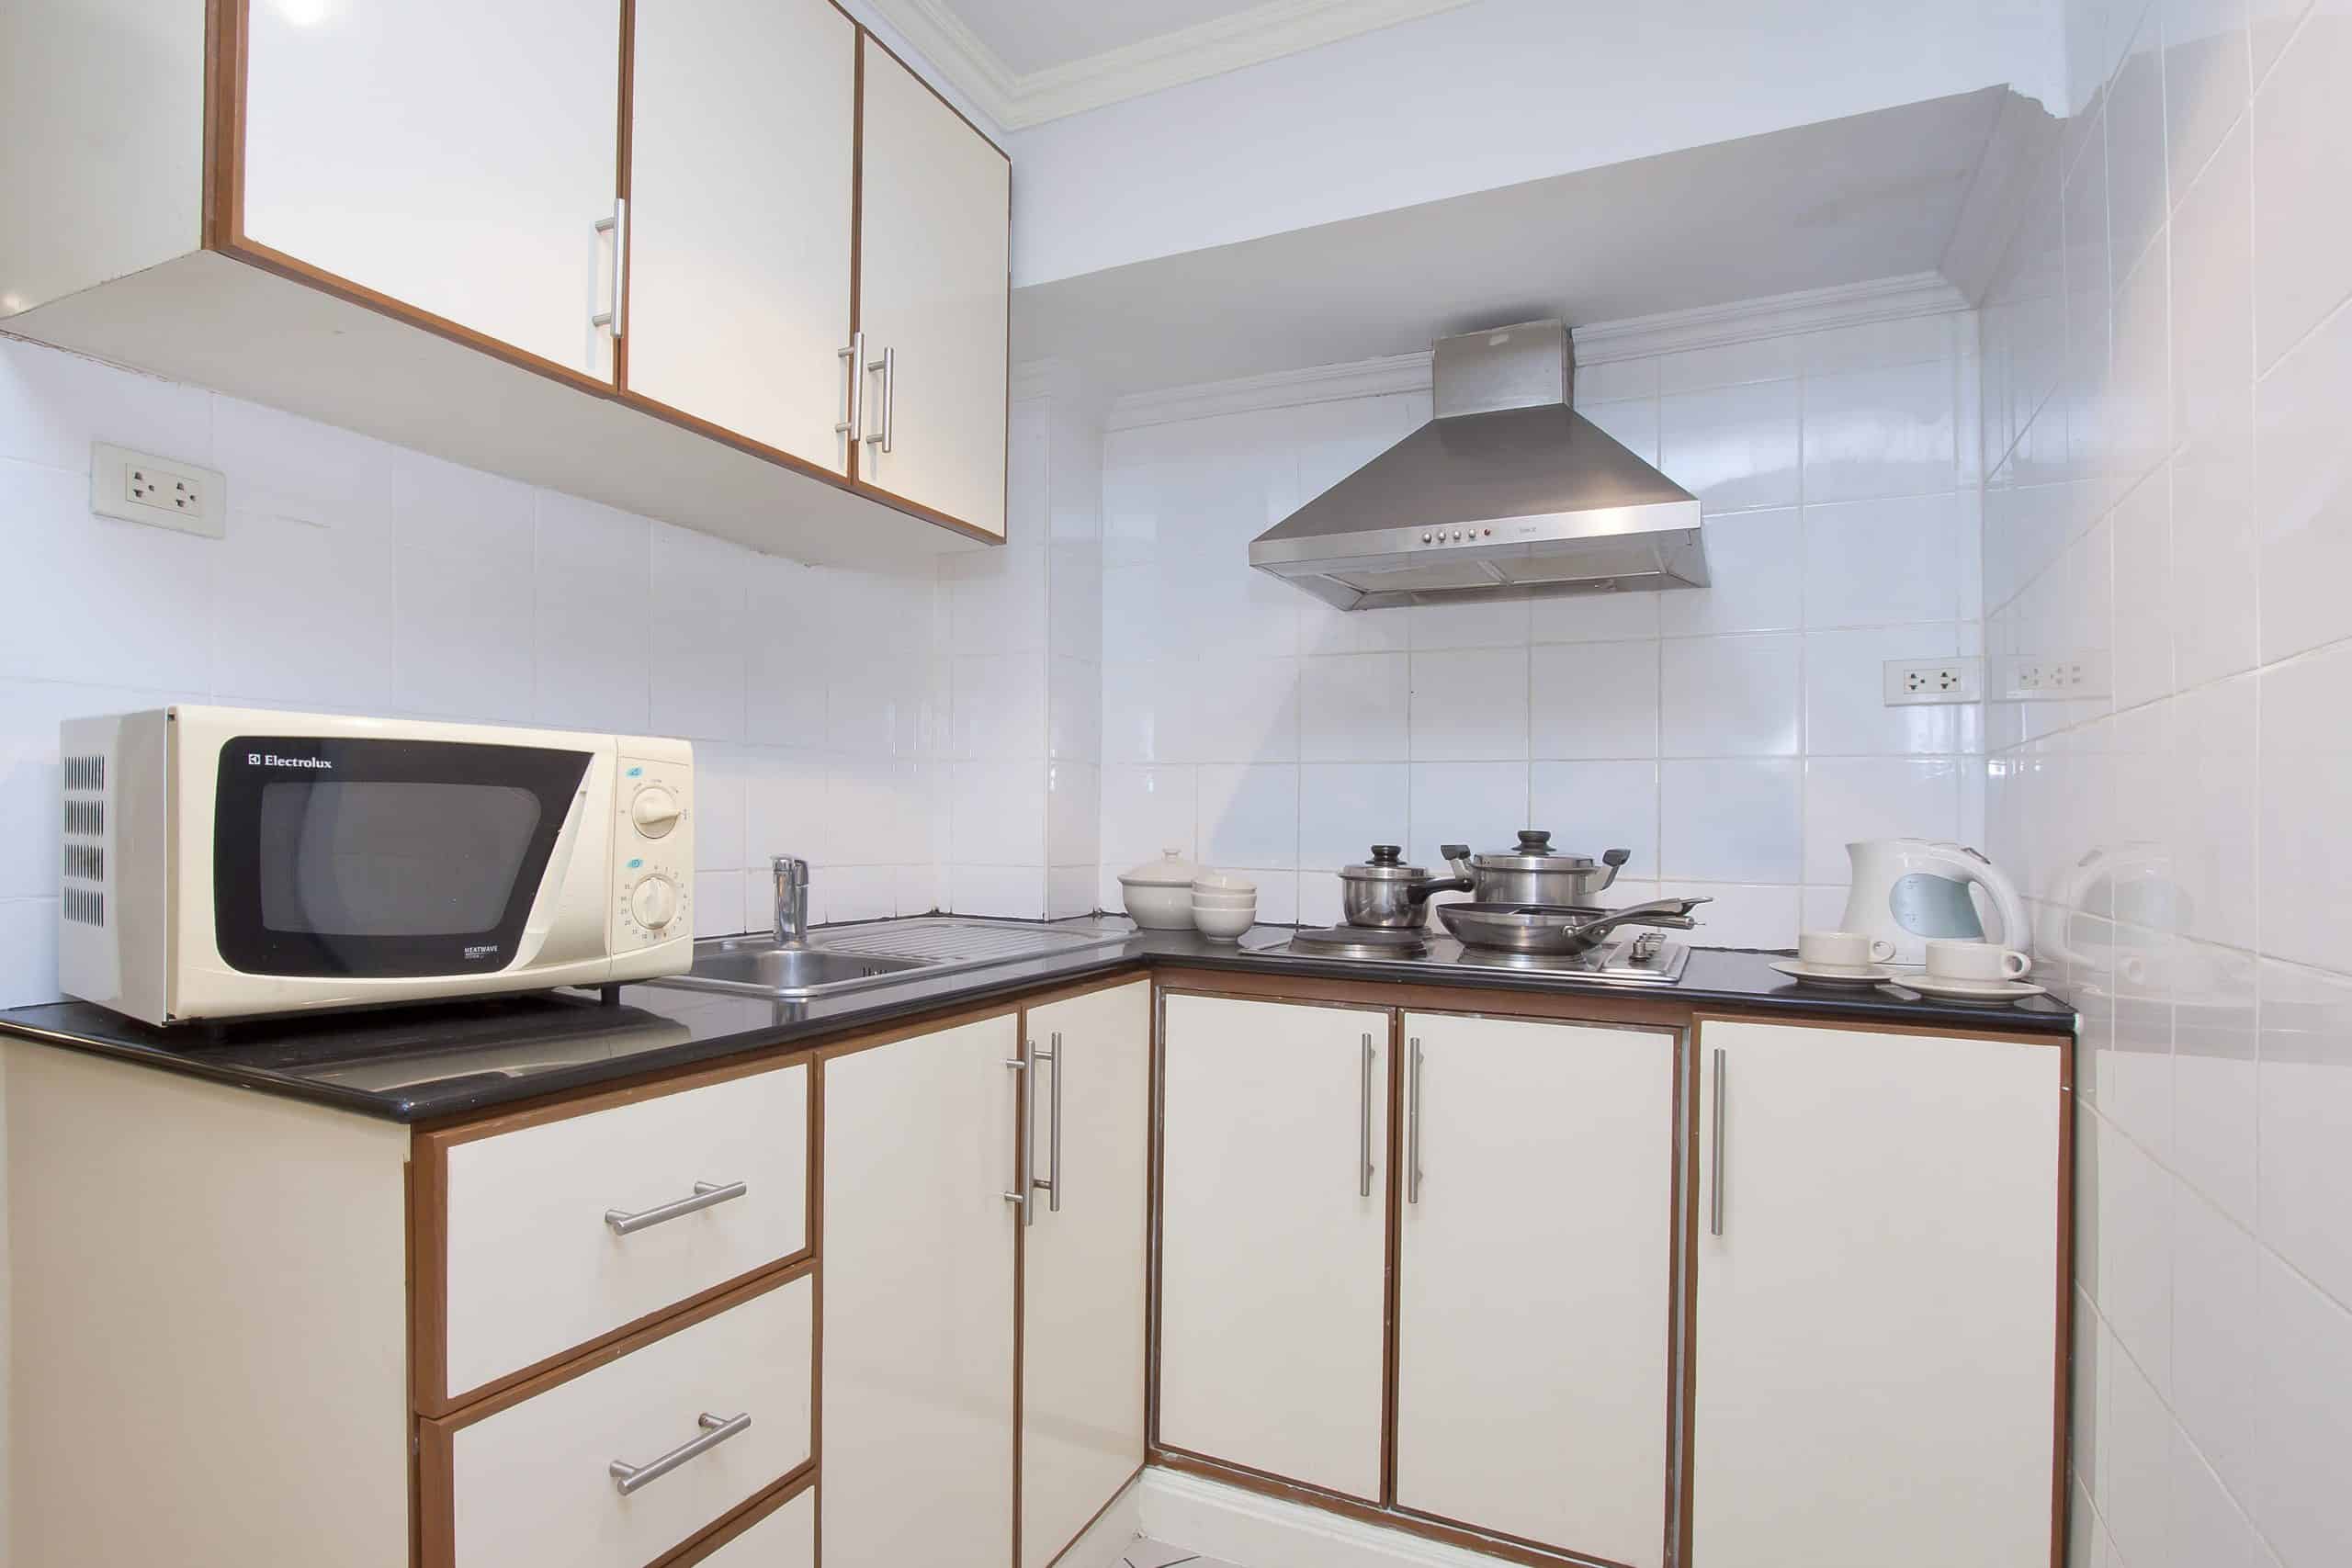 Well-equipped and functional Studio 10 kitchenette at Argyle Apartments in Pattaya, featuring a microwave and hot plate, cookware, dishes, utensils, and a small dining table with chairs